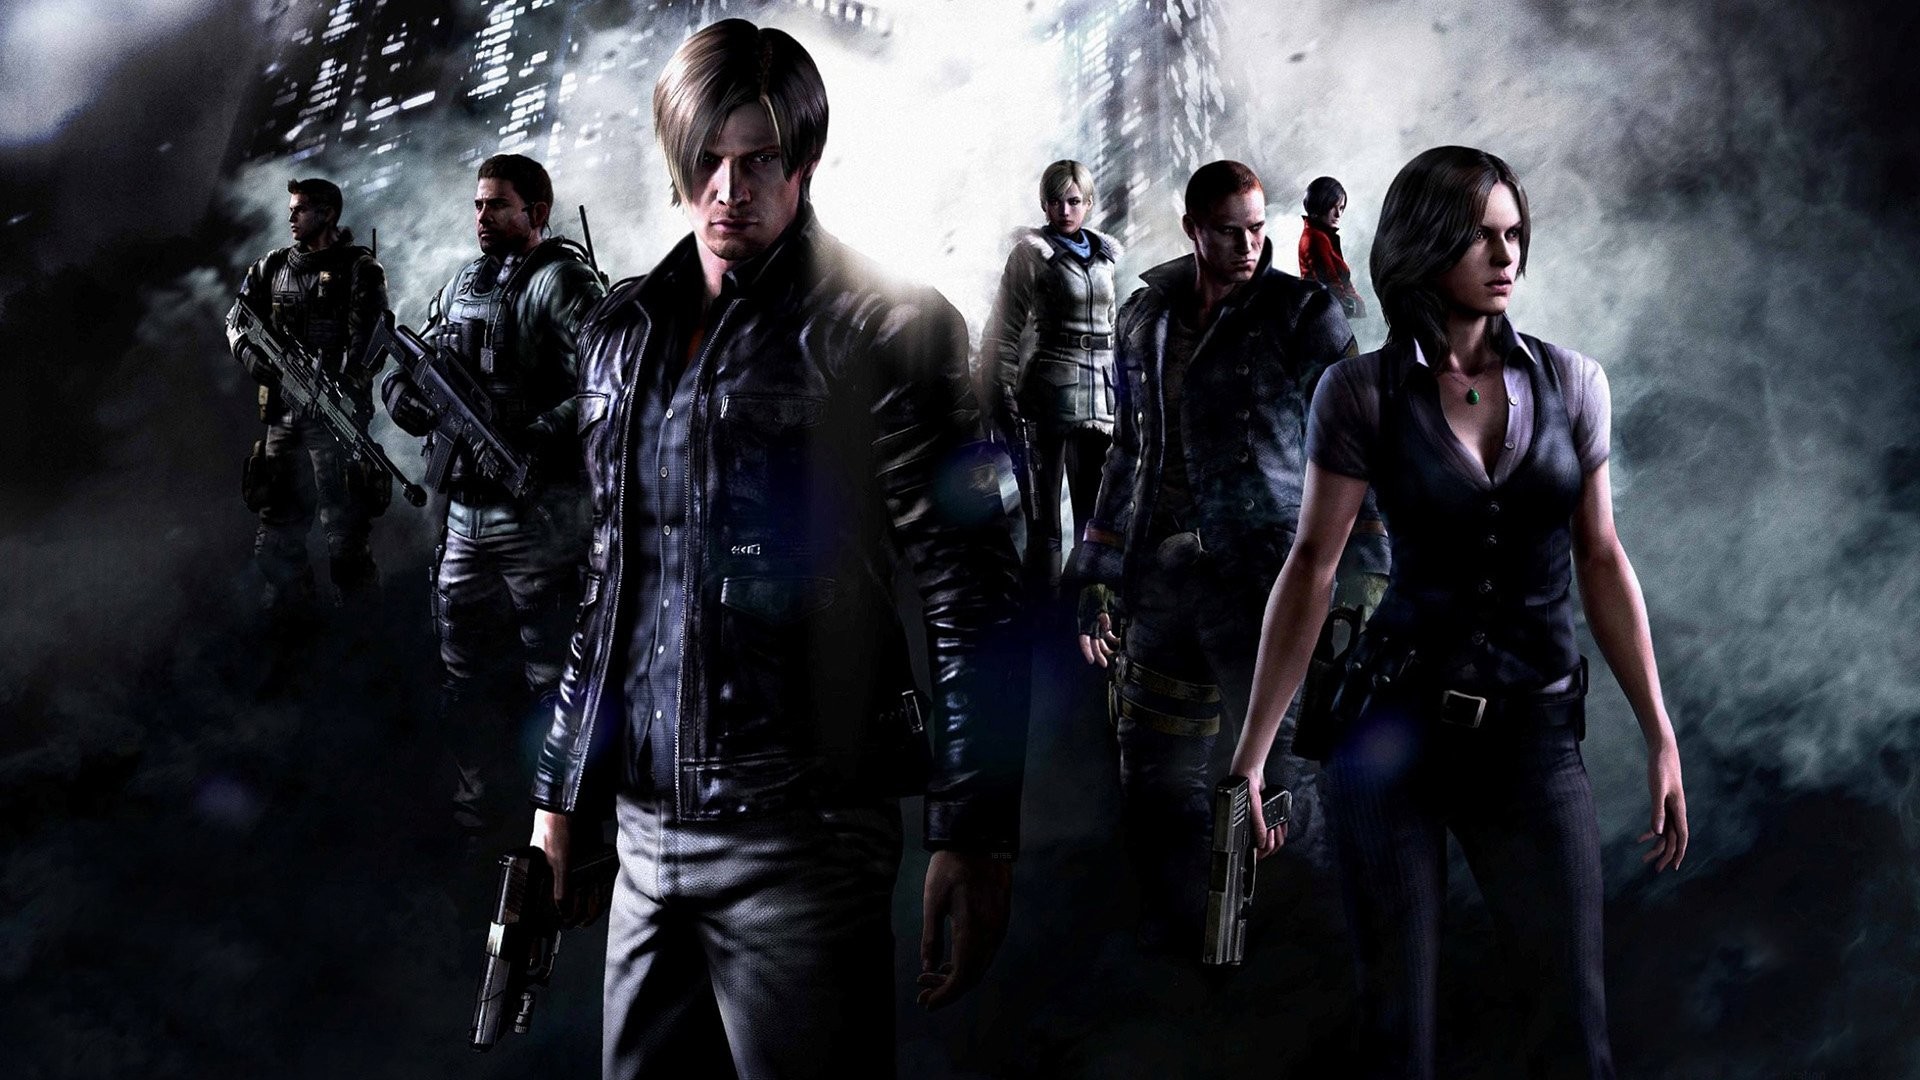 HD Wallpaper Background ID312131. Video Game Resident Evil 6